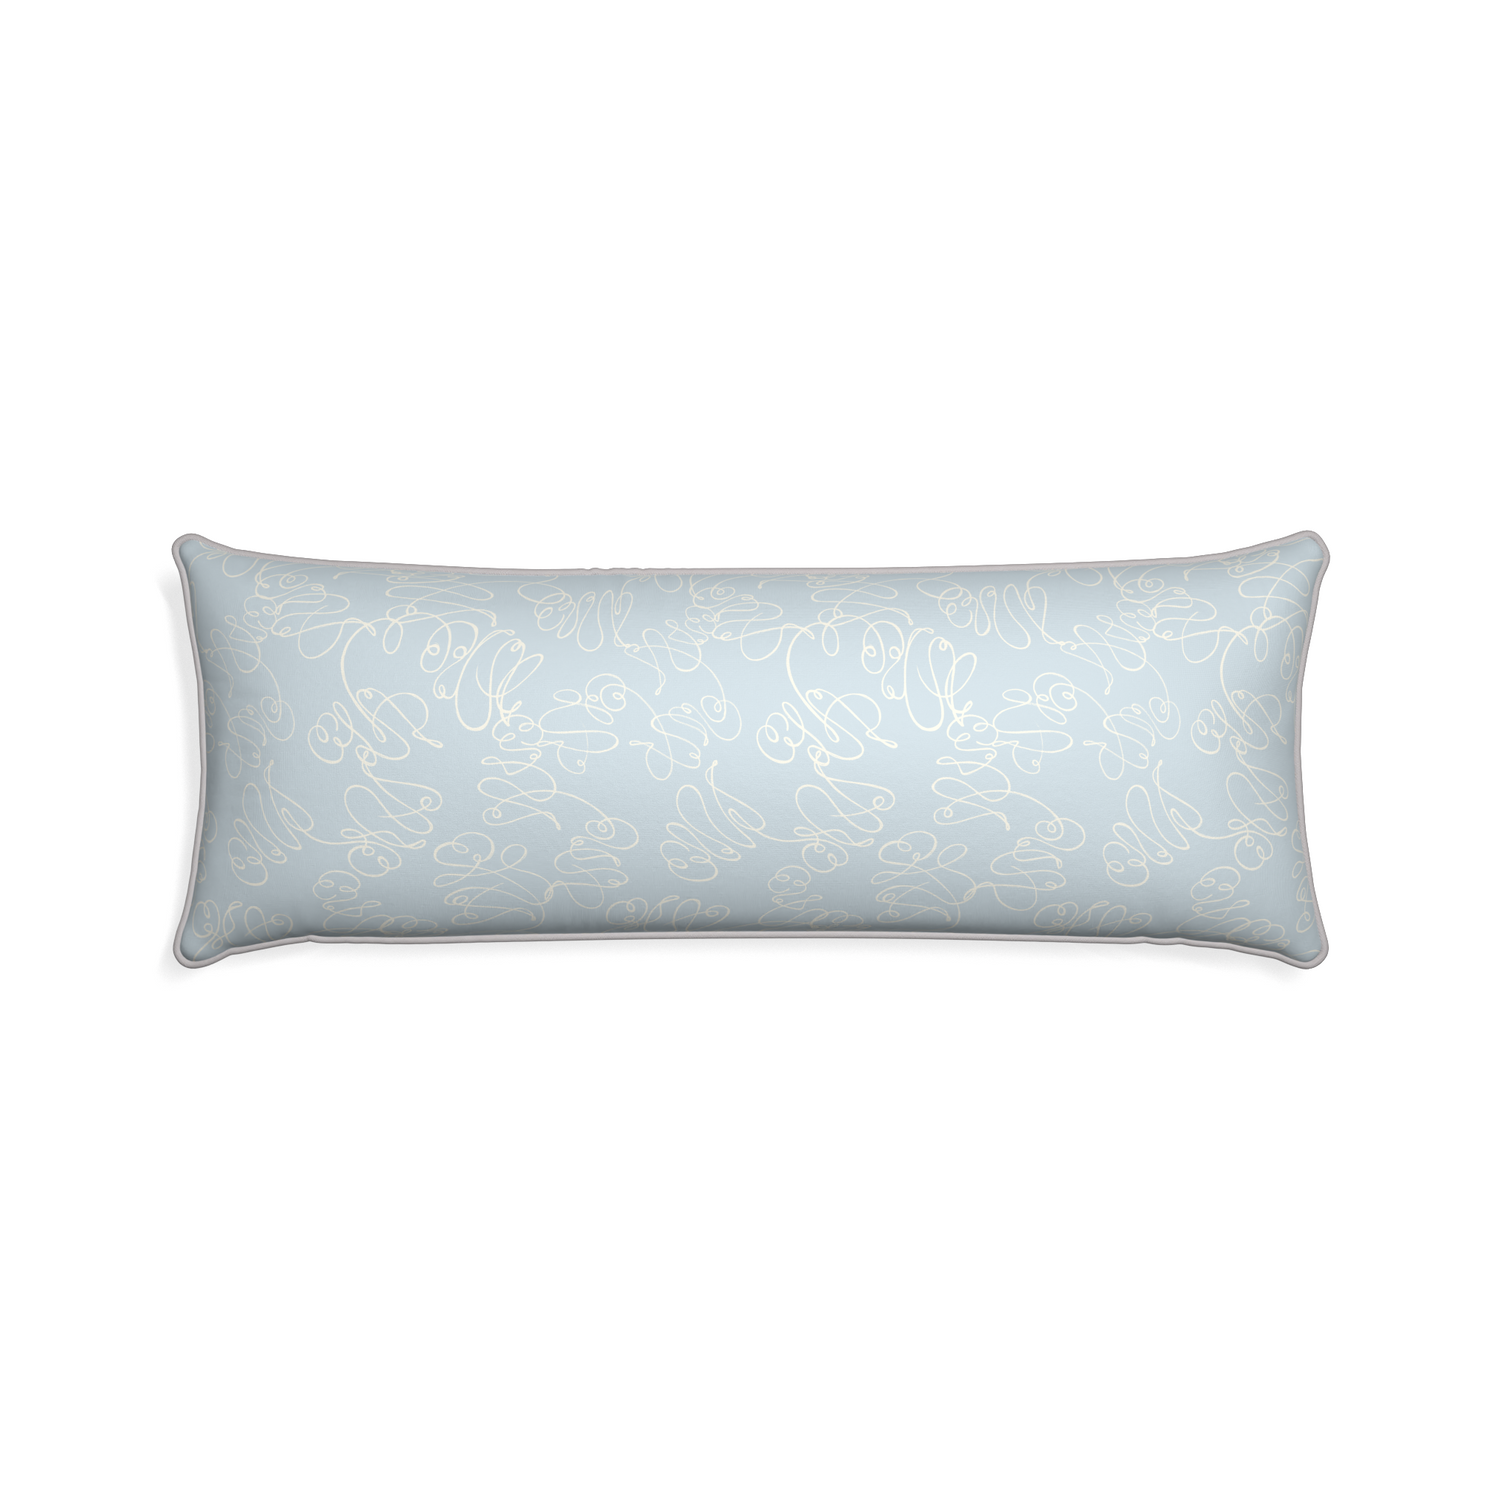 Xl-lumbar mirabella custom pillow with pebble piping on white background